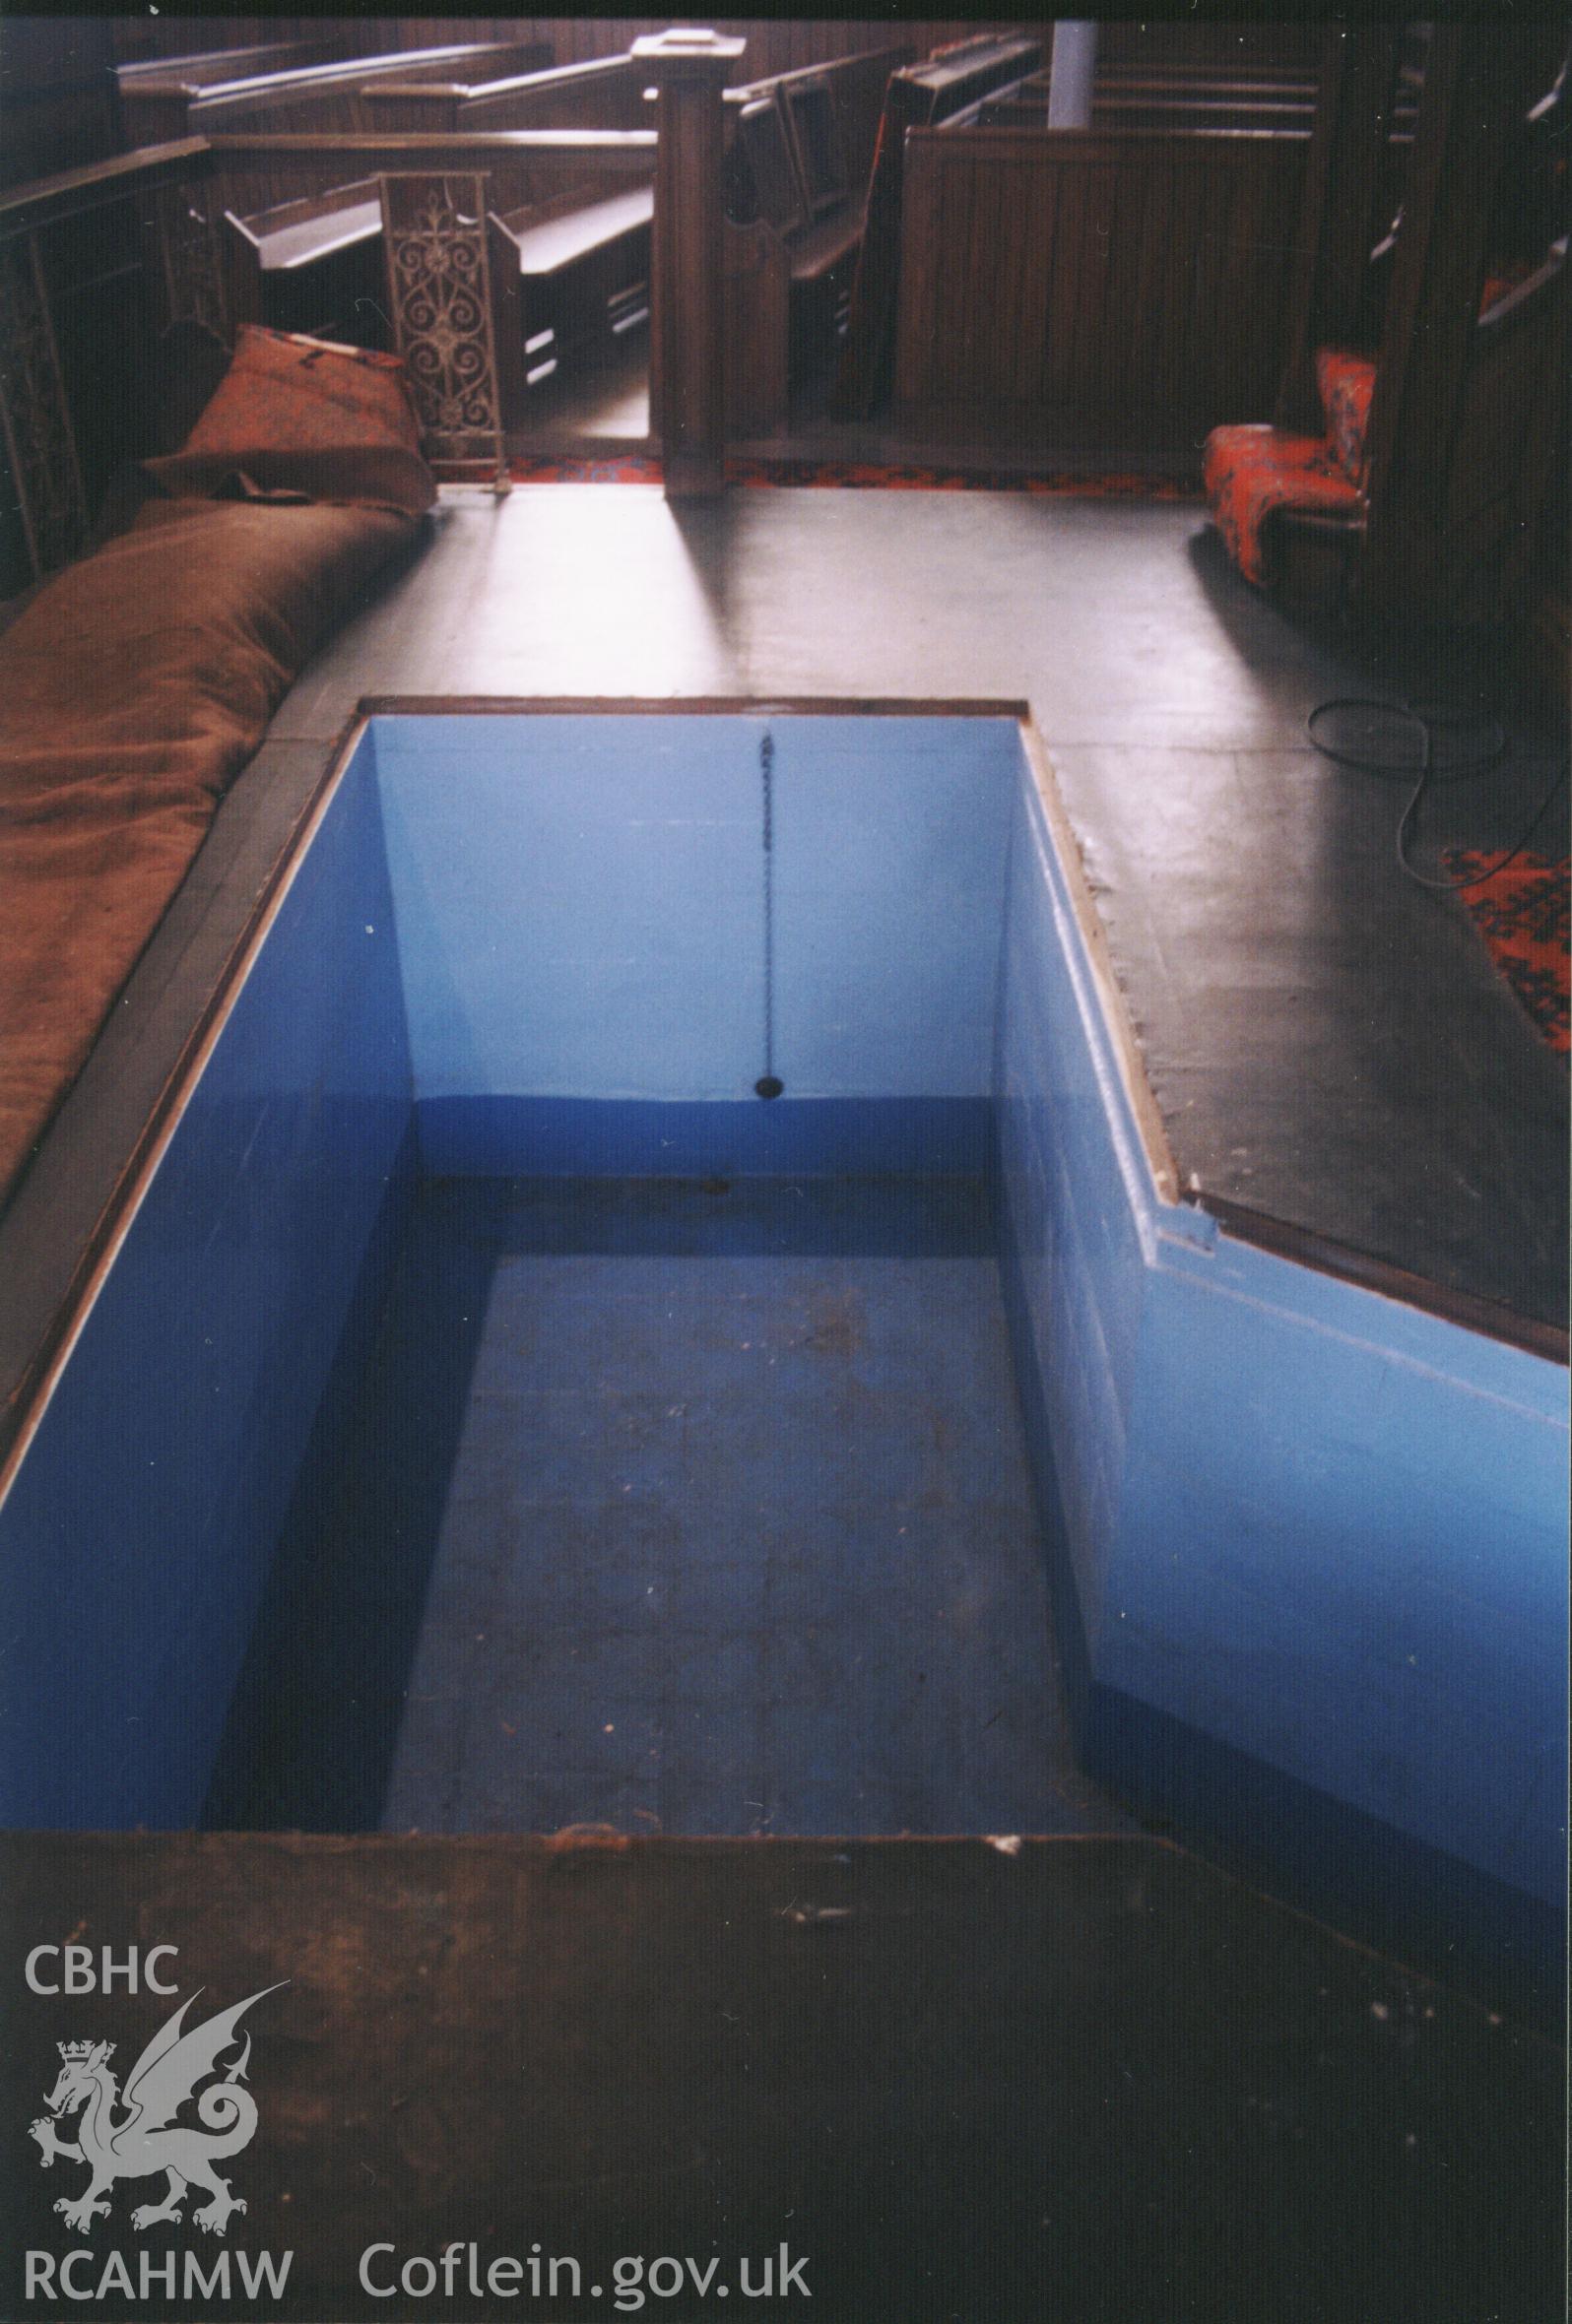 Colour photograph of the Baptismal pool, 2003. Donated to the RCAHMW by Cyril Philips as part of the Digital Dissent Project.